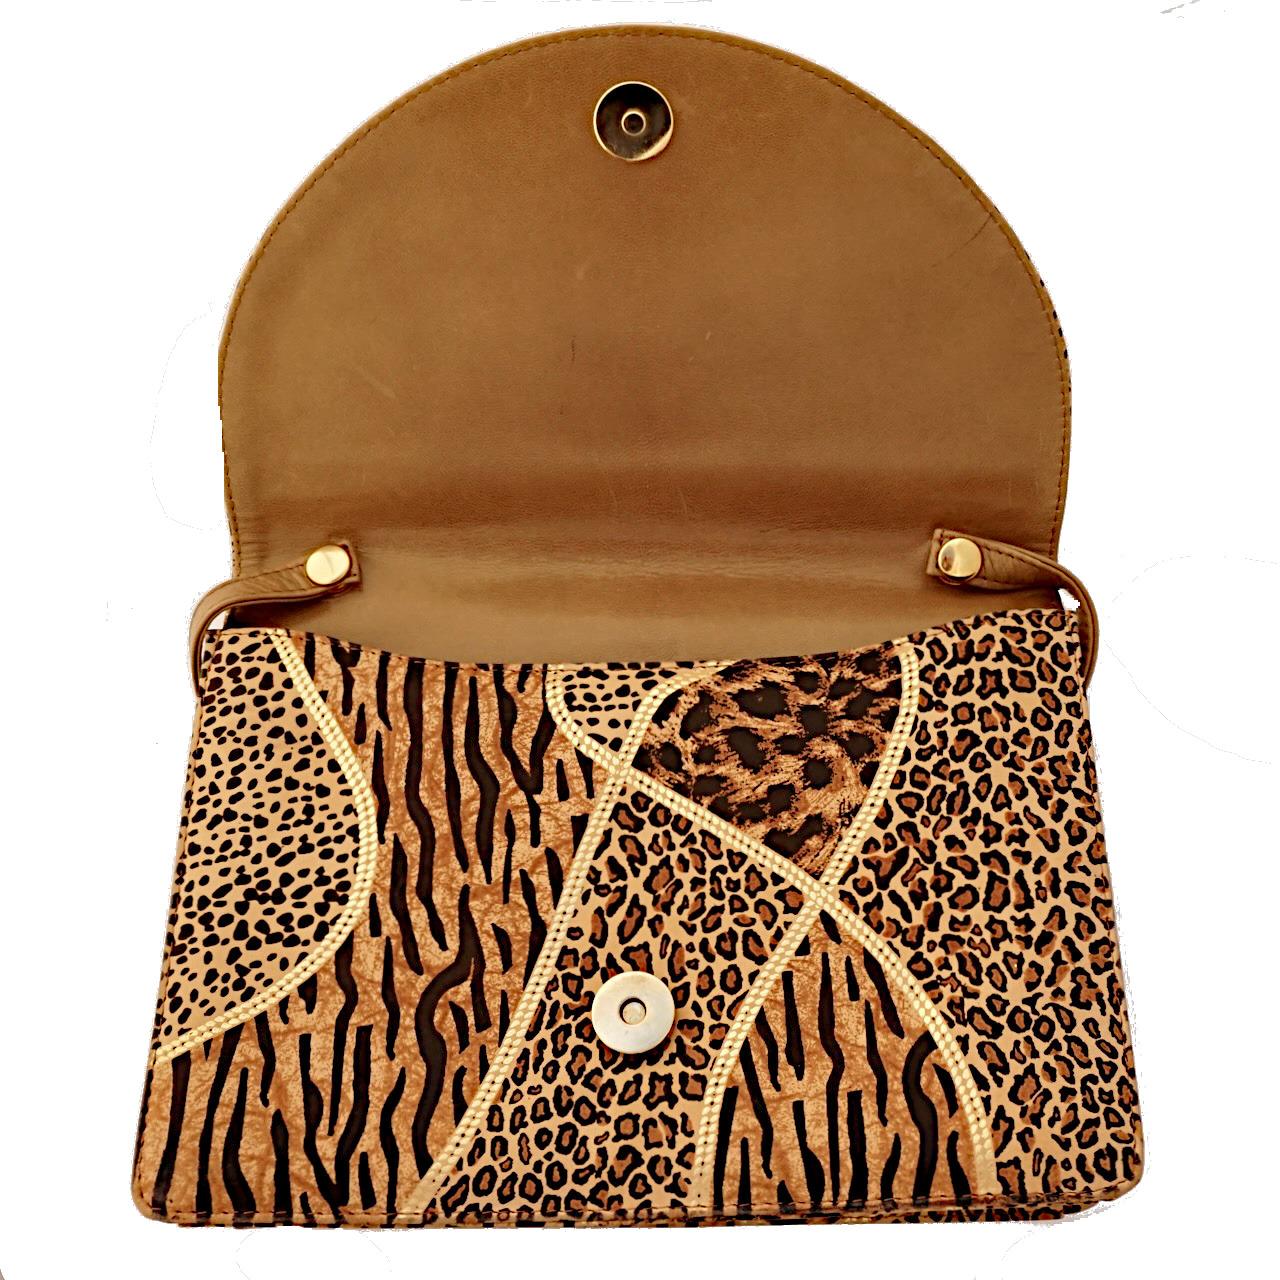 Stylish Carvela animal print faux leather bag with gold highlights, and a magnetic clasp. Measuring width 22.1 cm / 8.7 inches at the base, height 16.2 cm / 6.37 inches, and with a strap drop of 43.5 cm / 17.1 inches at the shortest length (the